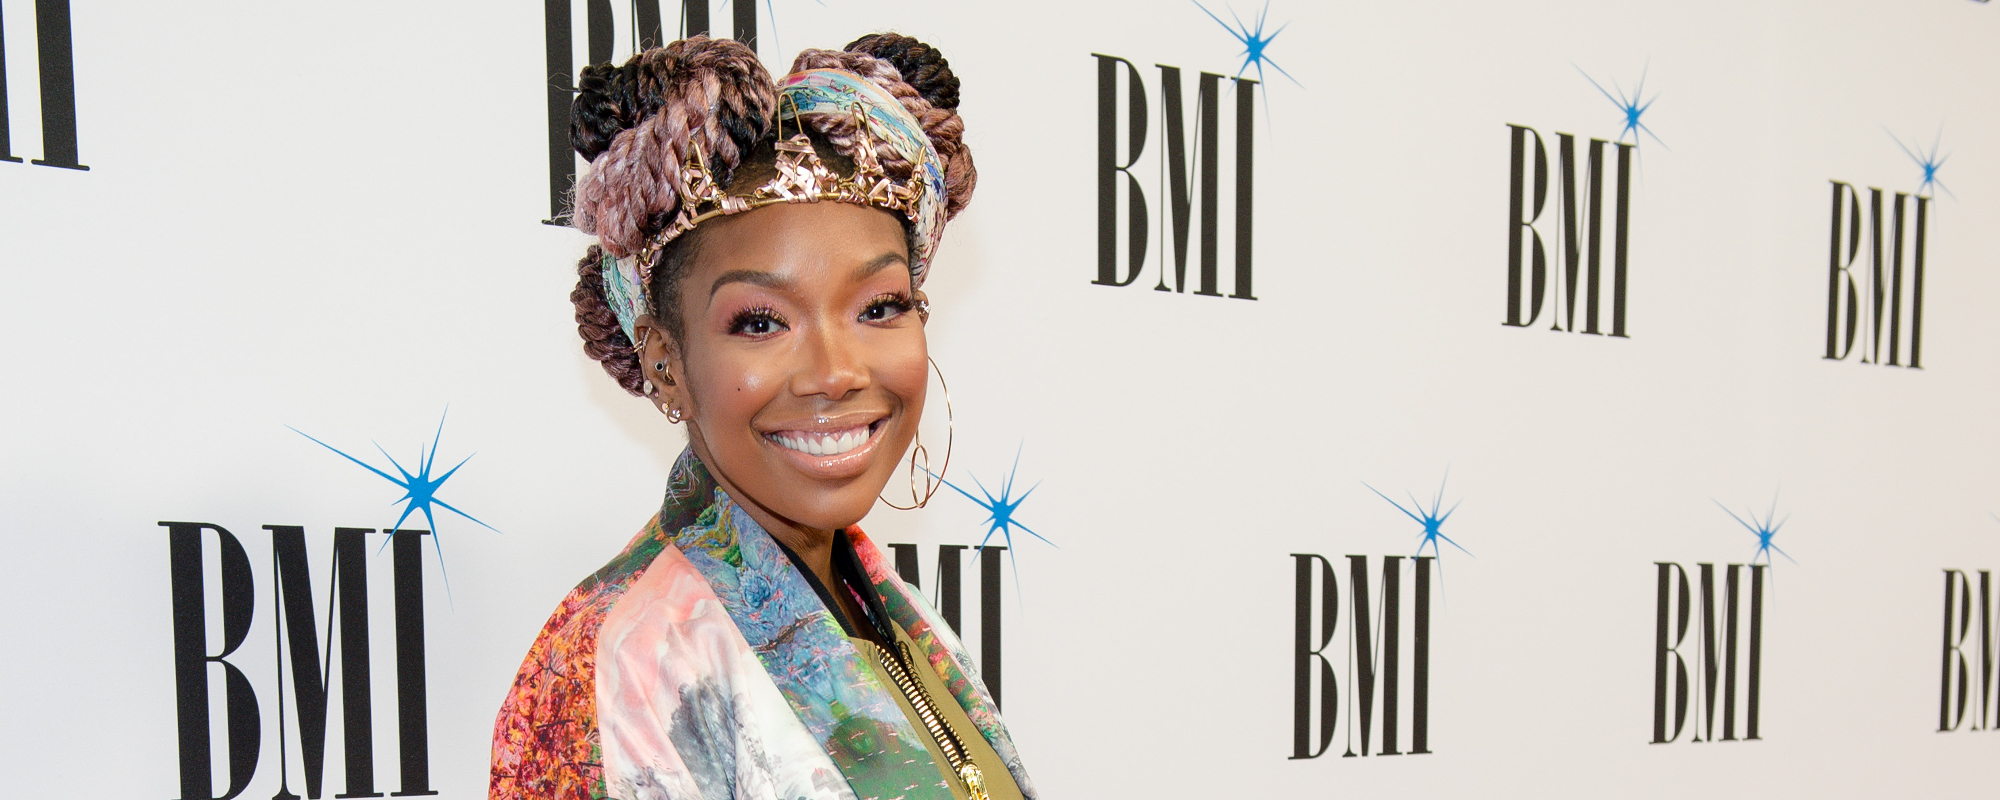 Brandy Gifts Fans What They’ve Been Asking For With First Christmas Album